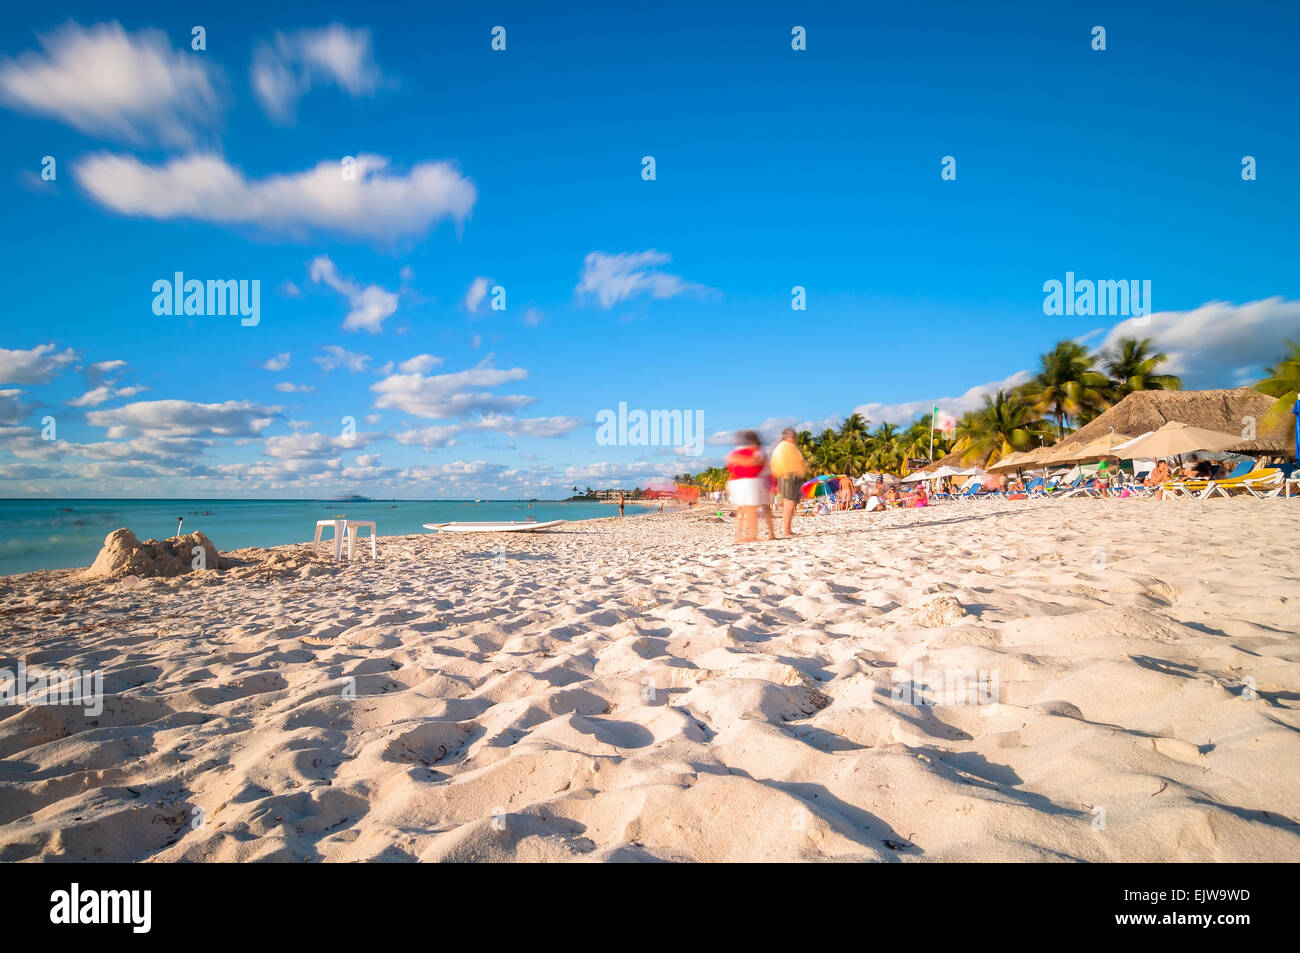 Isla Mujeres, Mexico - April 21, 2014: long exposure of tourists enjoying sunset on famous Playa del Norte beach in Isla Mujeres Stock Photo